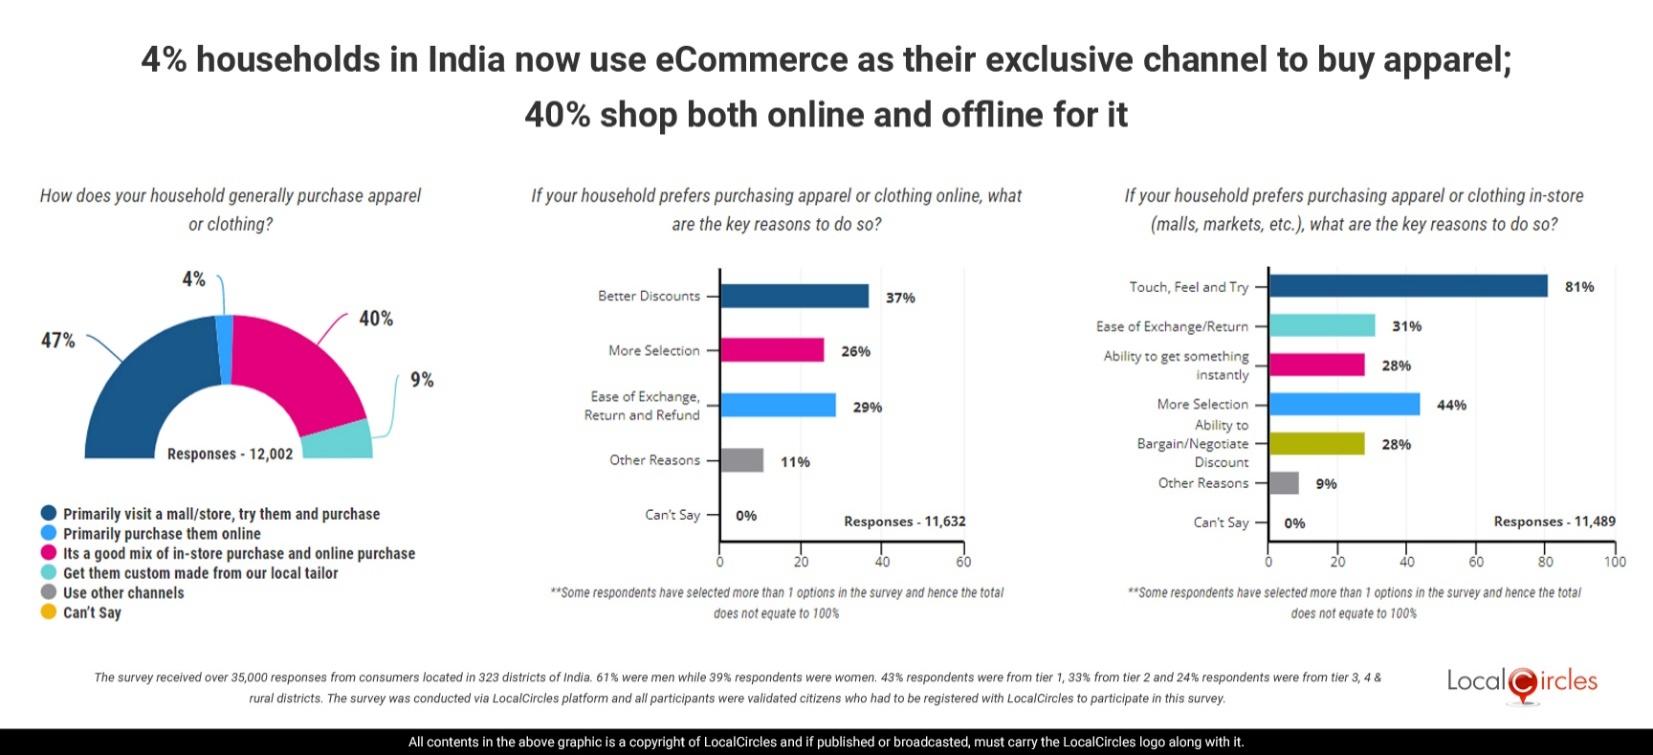 4% households in India now use eCommerce as their exclusive channel to buy apparel; 40% shop both online and offline for it